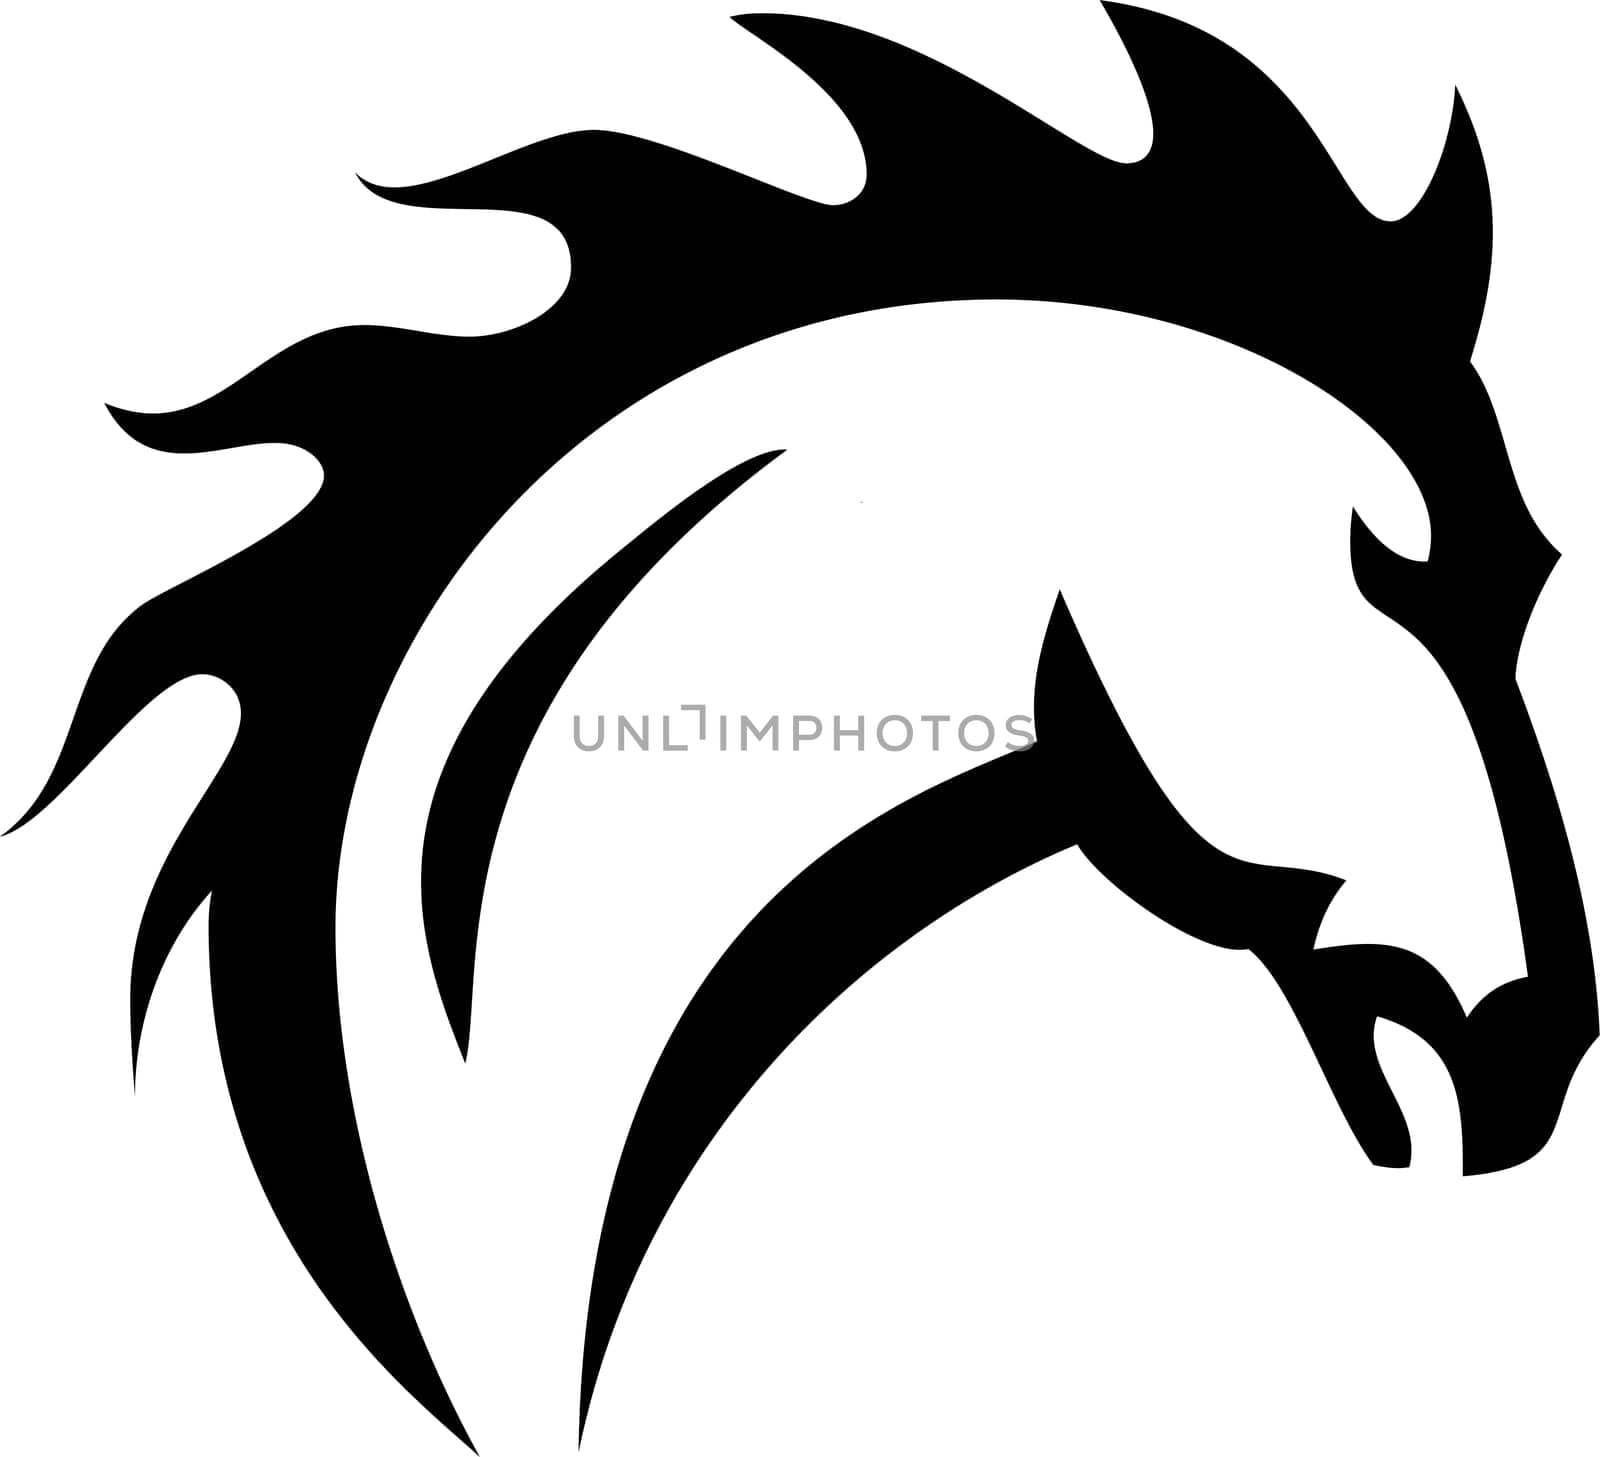 Horse or Stallion with Fiery Mane on Fire Side View Tribal Tattoo Style by patrimonio